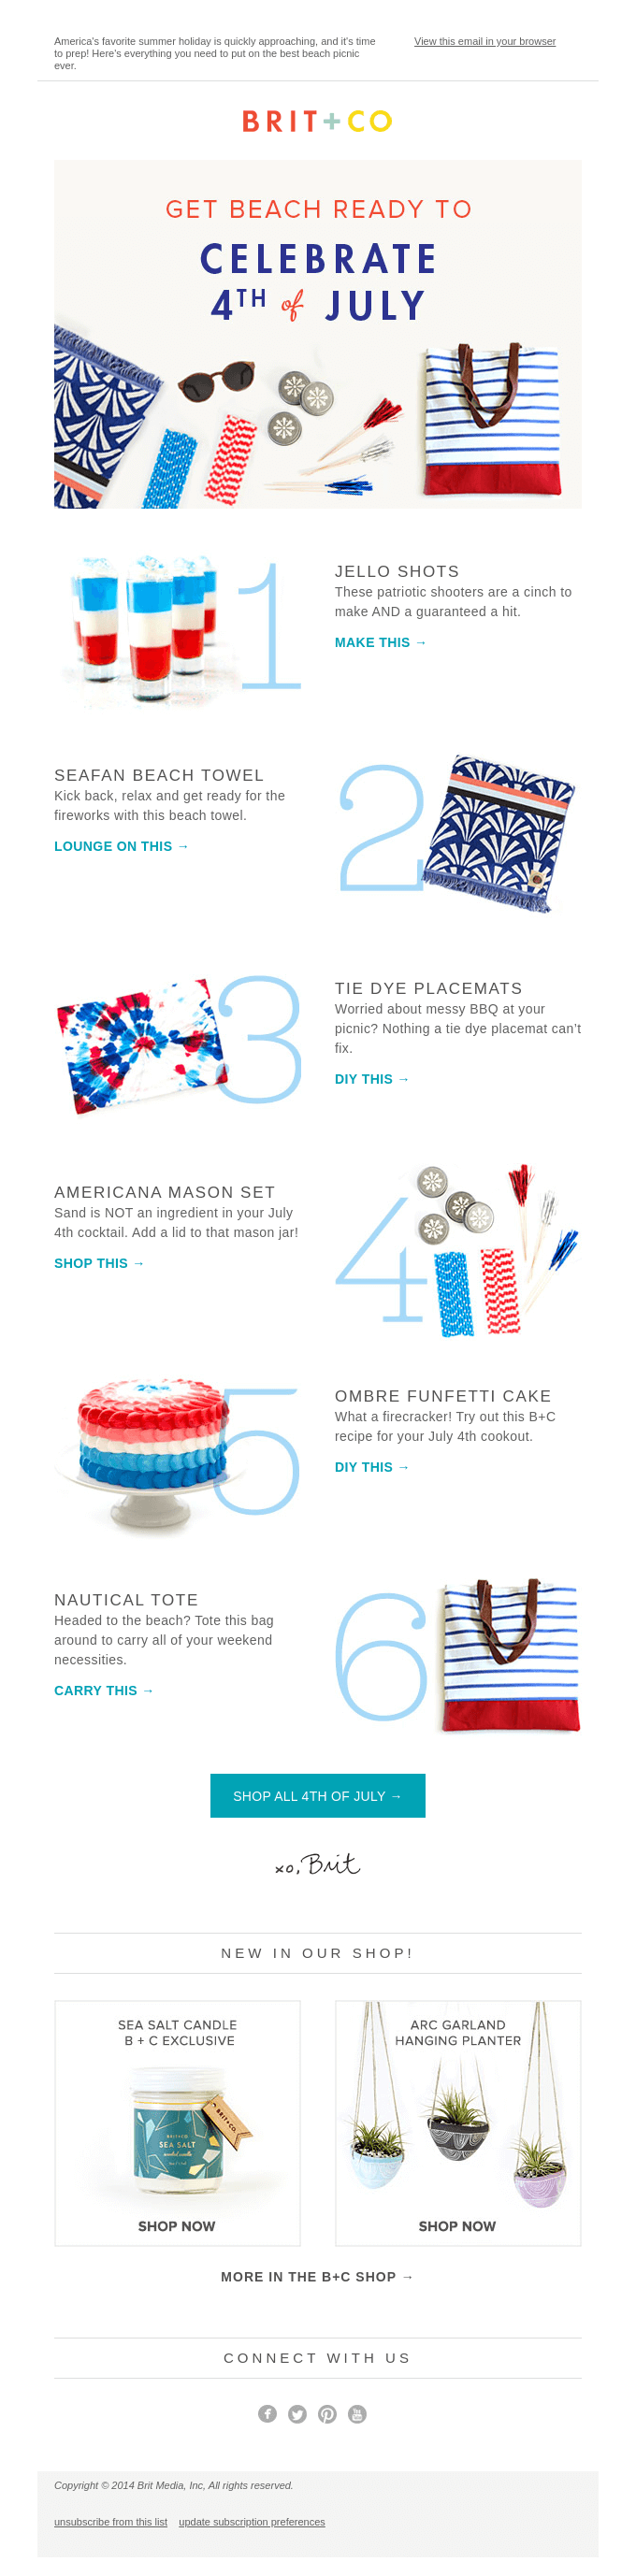 An example of a creative Fourth of July newsletter from Brit + Co